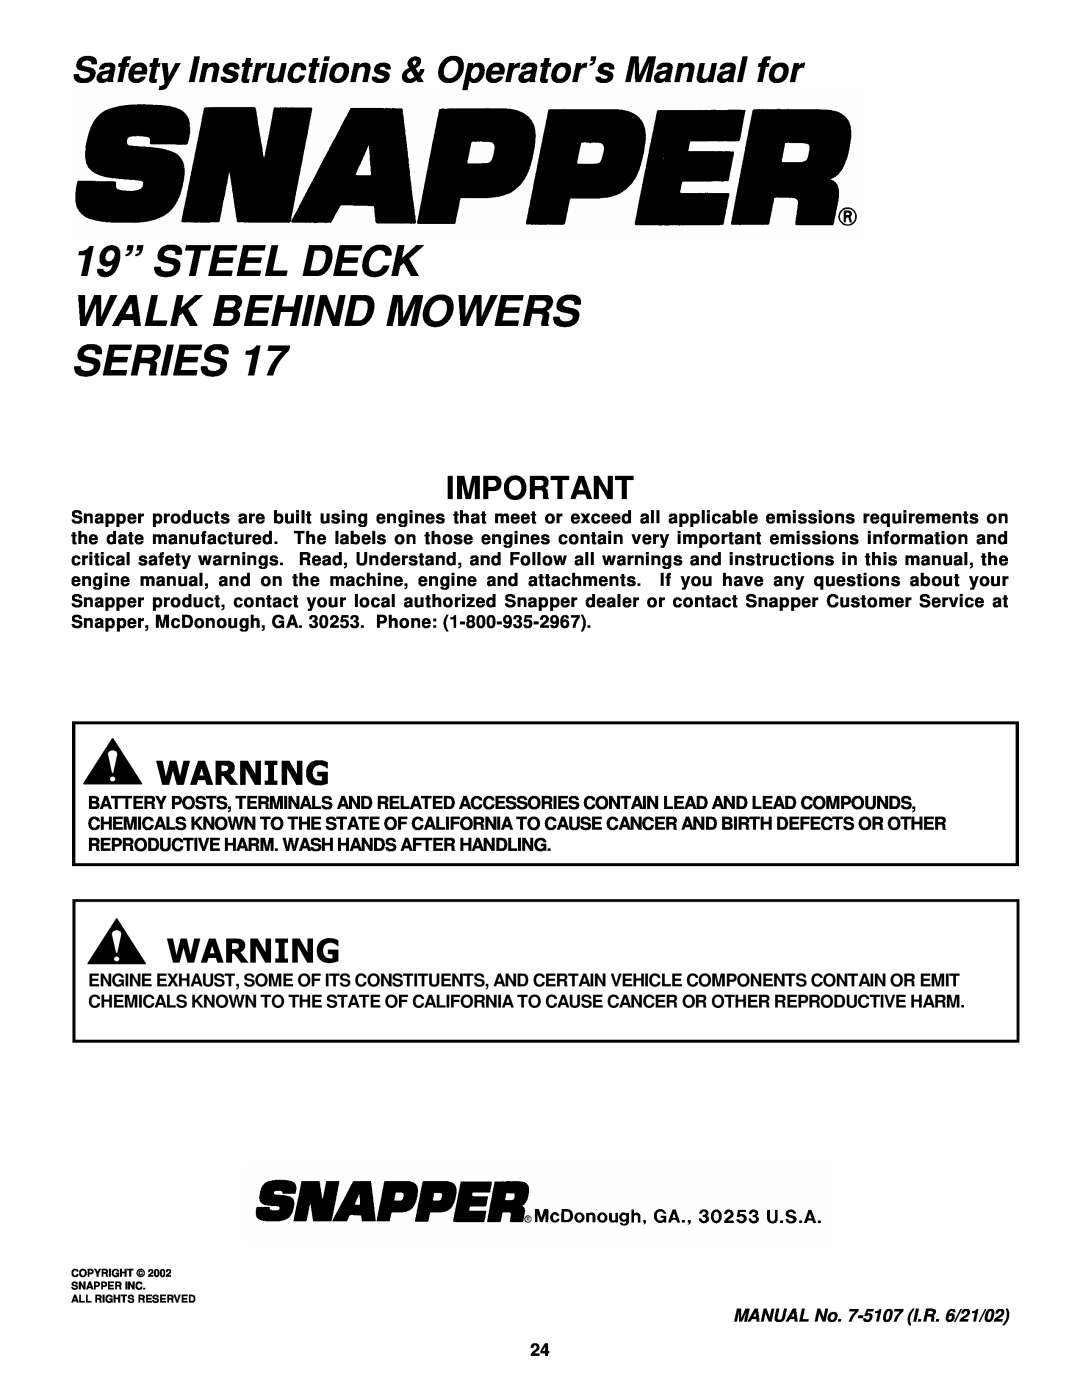 Snapper R195517B 19” STEEL DECK WALK BEHIND MOWERS SERIES, Safety Instructions & Operator’s Manual for 